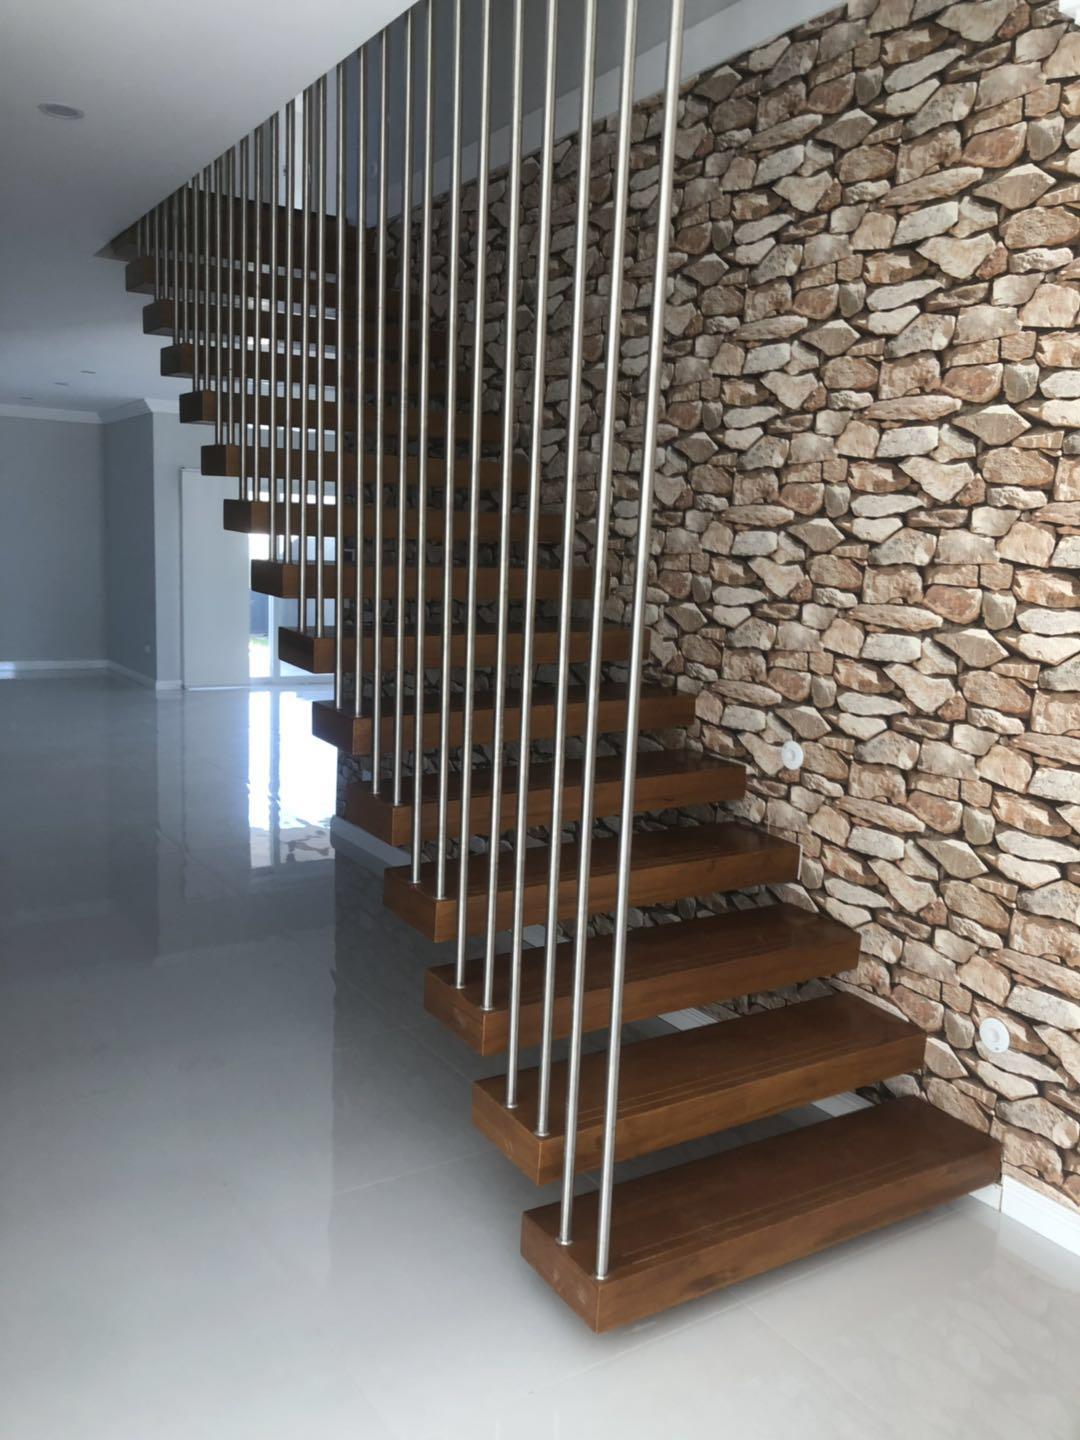 YUDI Stairs Best building floating stairs vendor for apartment